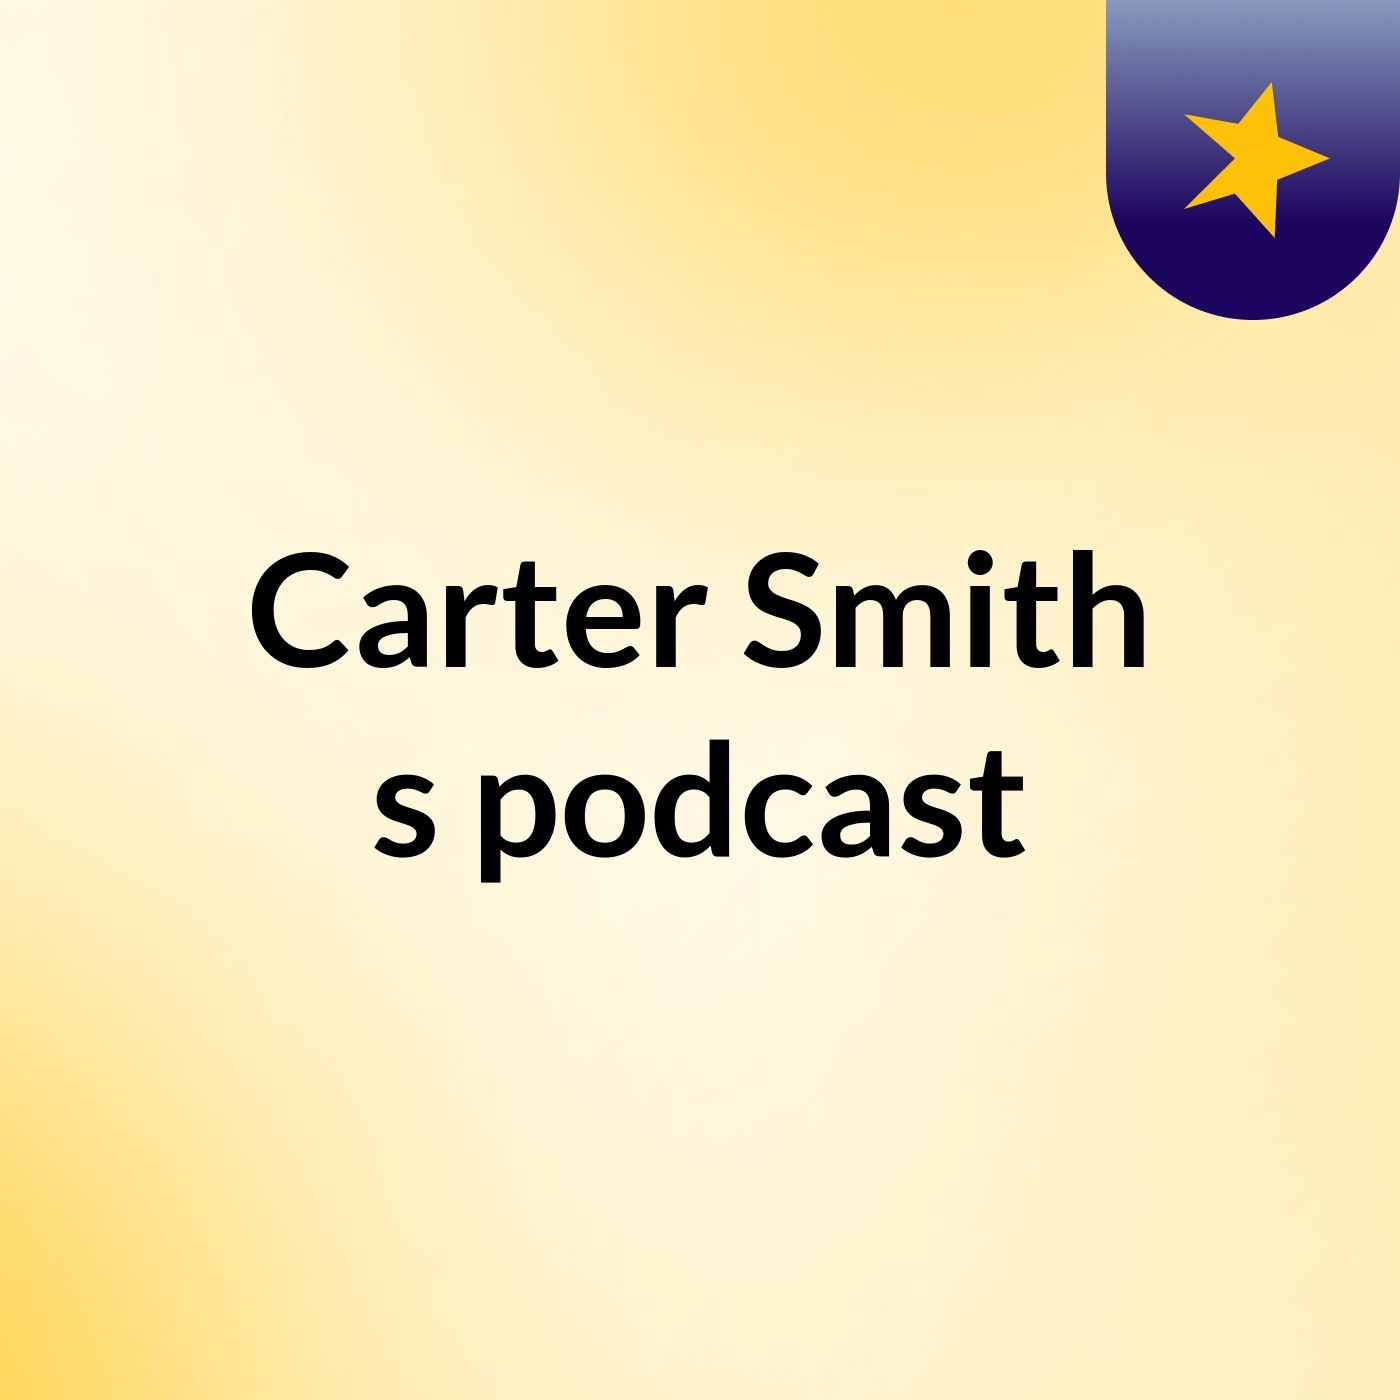 Carter Smith's podcast